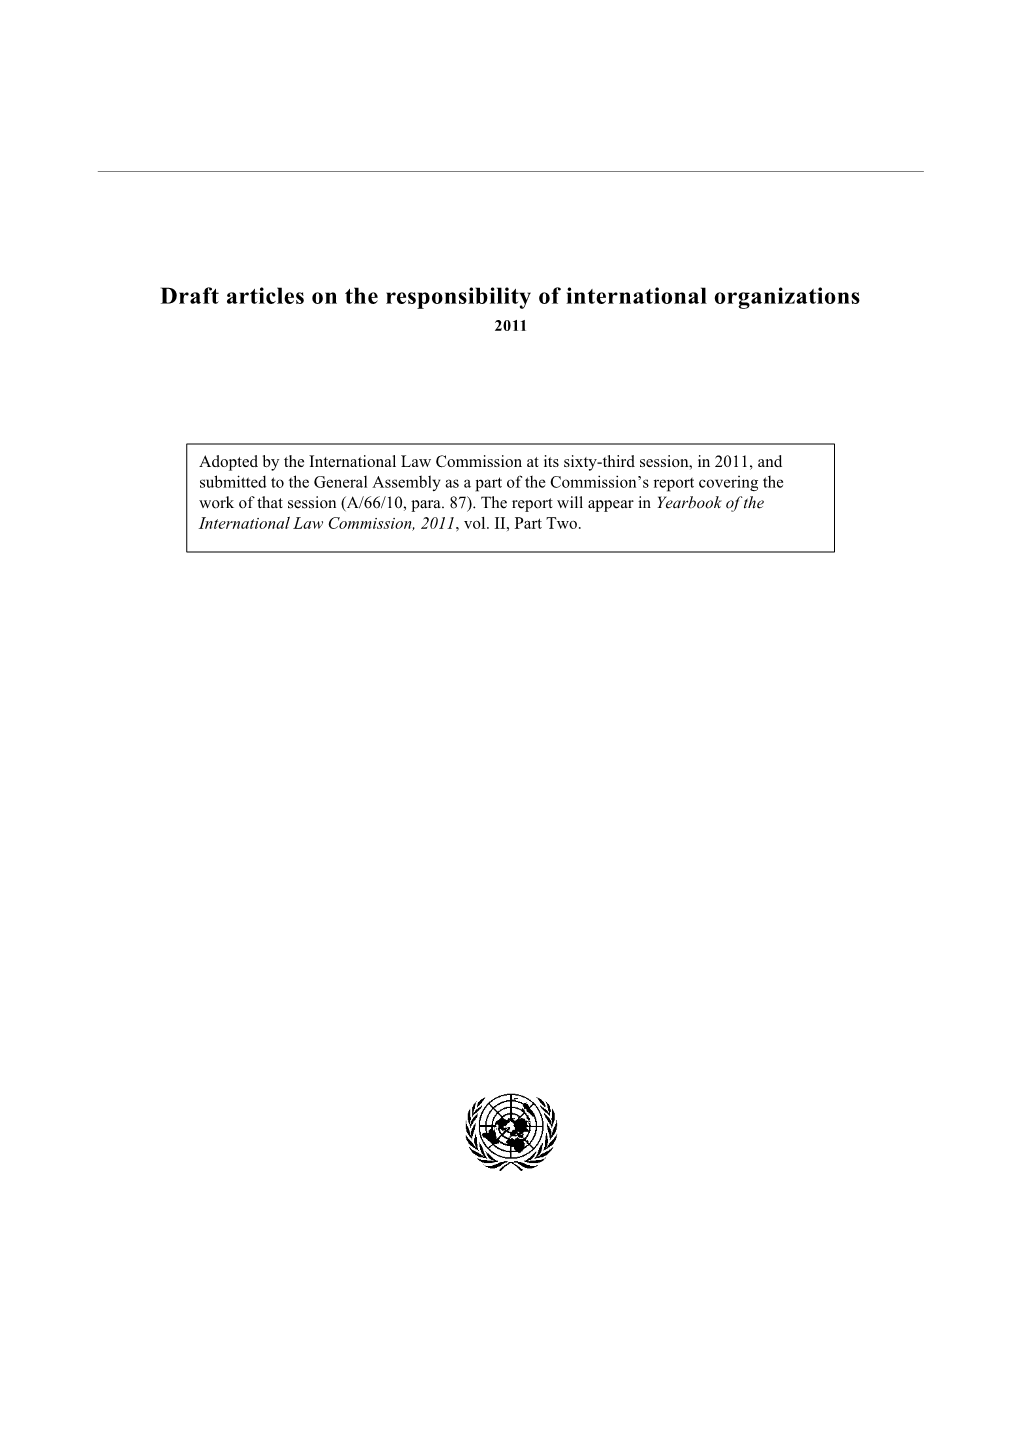 Draft Articles On The Responsibility Of International Organizations, 2011